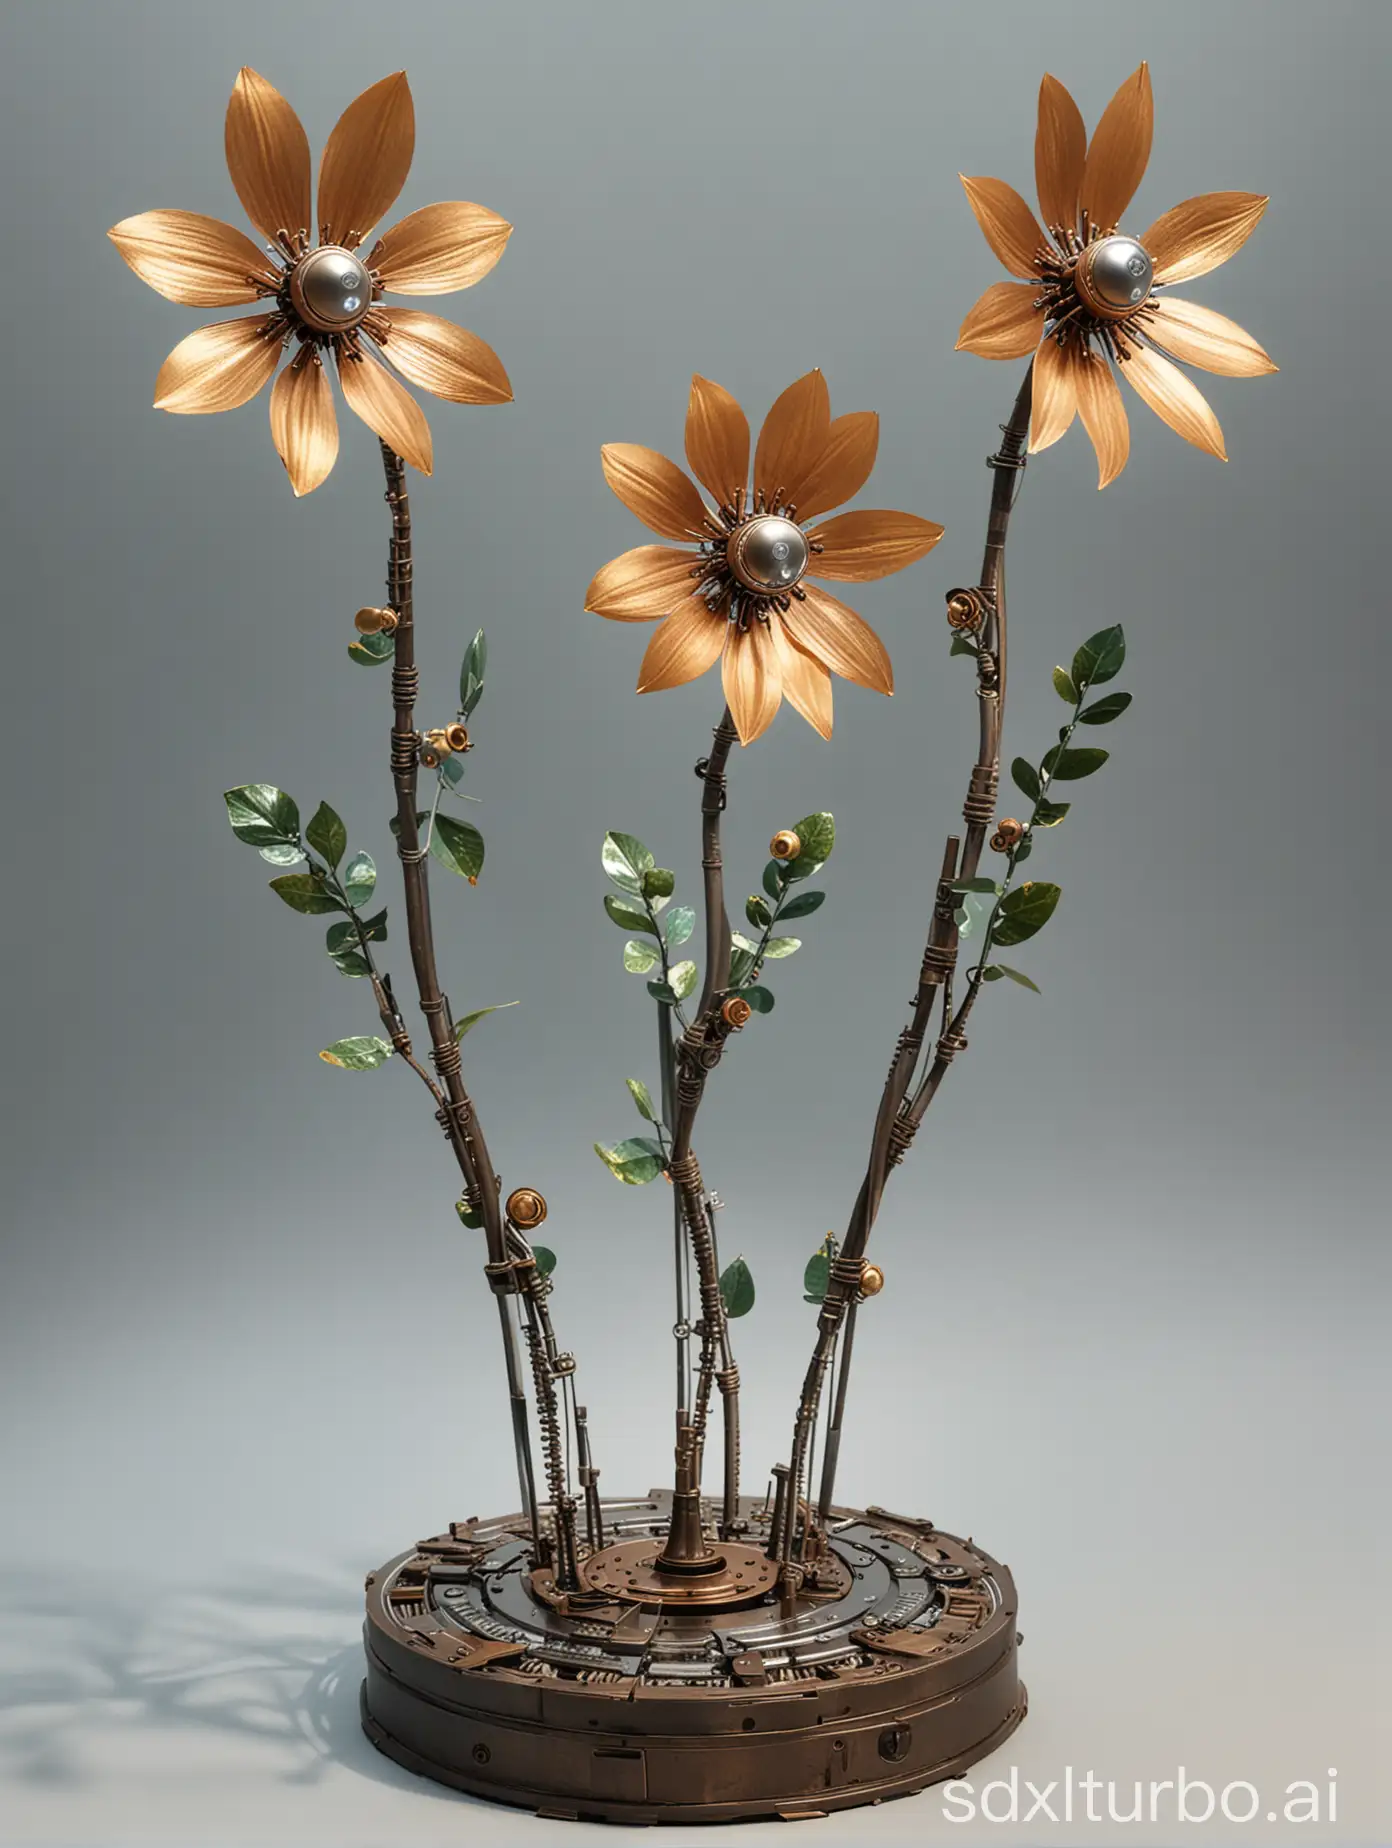 Three metal mechanical flowers grow on a base, with three flowers spiraling in height, two of which are buds, and the tallest one has transparent petals with circuit textures on them.